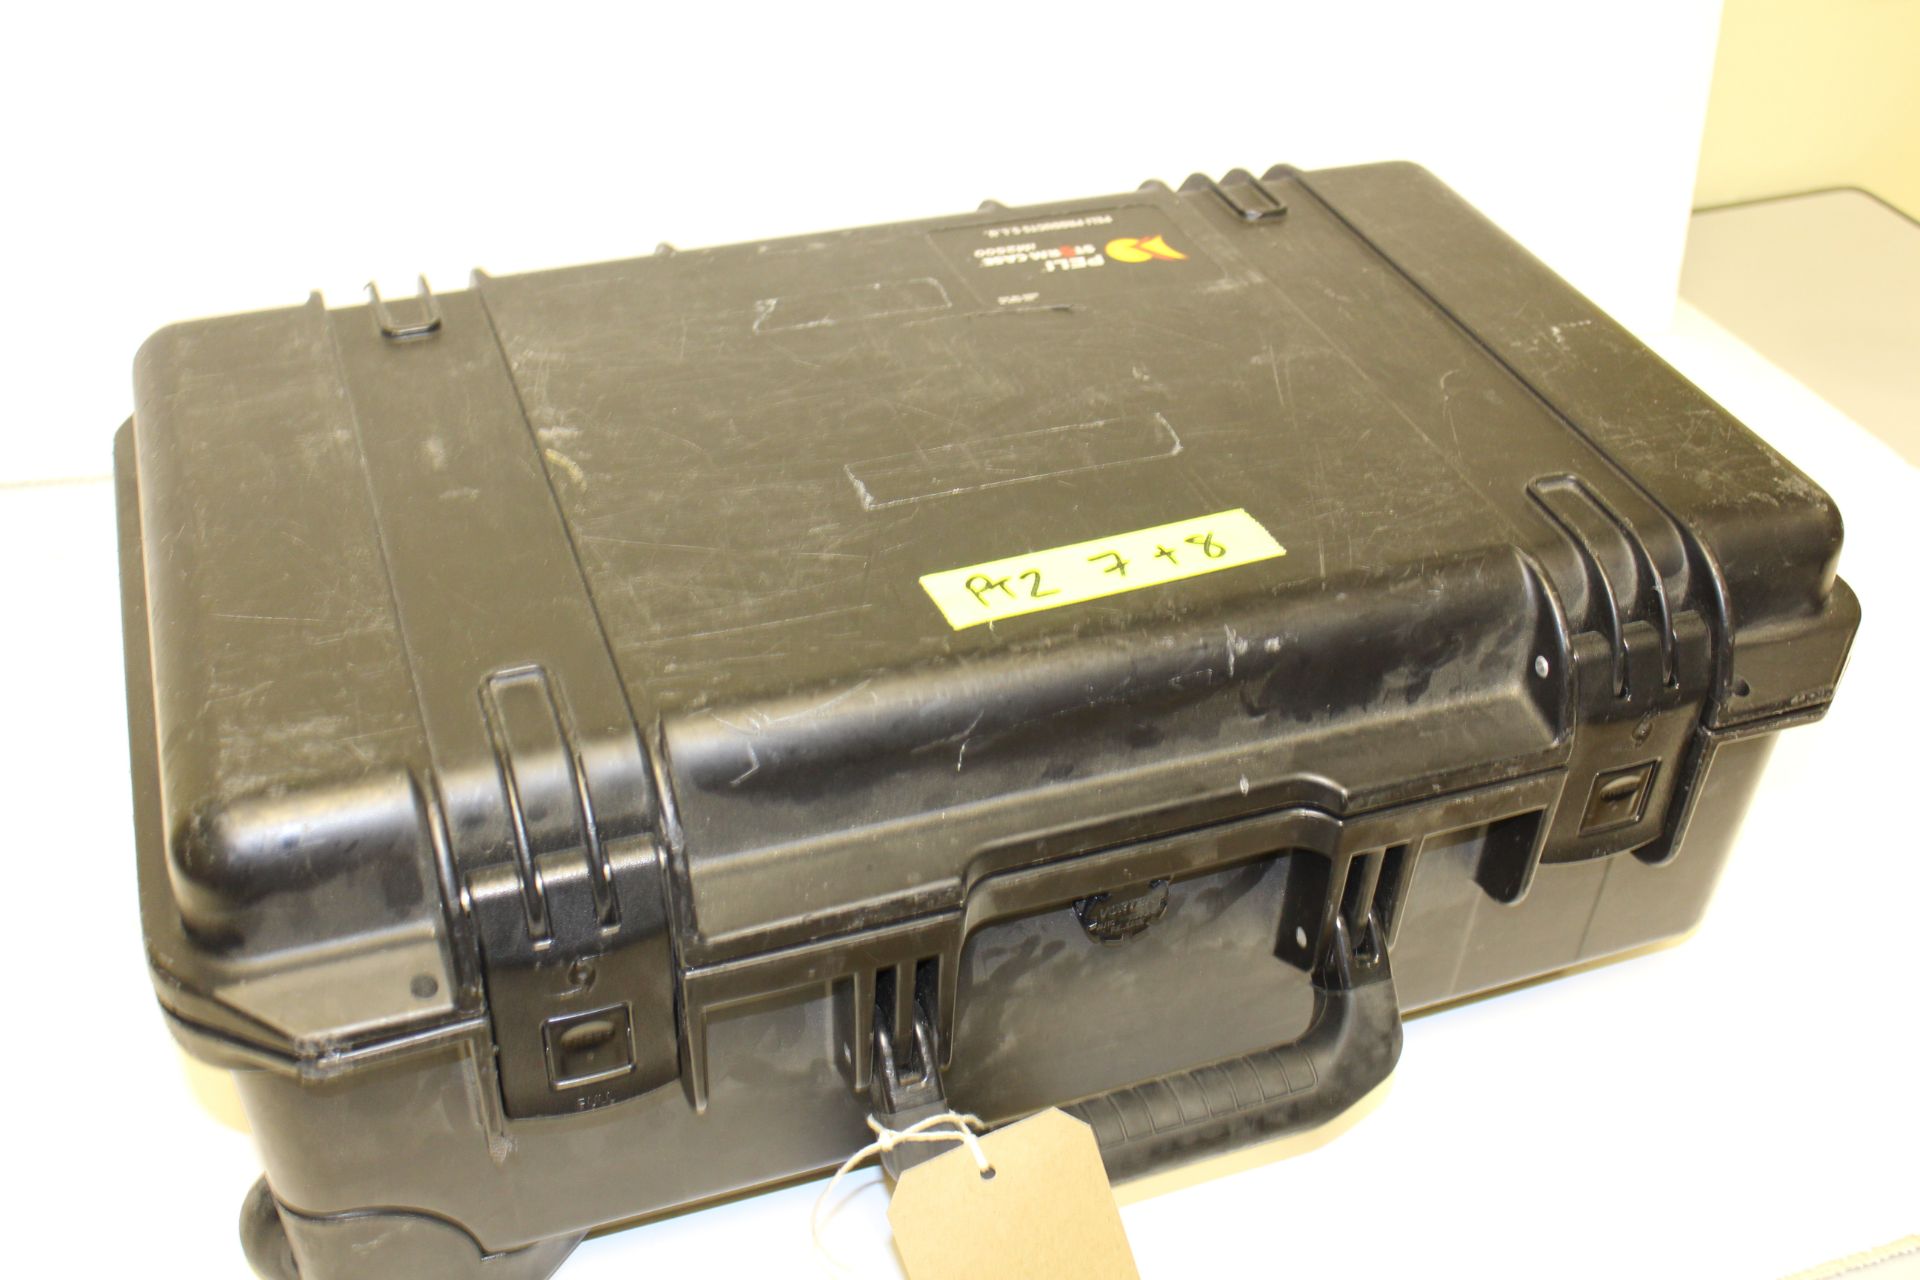 Panasonic AW-HE60 Pan Tilt Zoom Camera with Power Supplies and Flight Case - Image 2 of 2